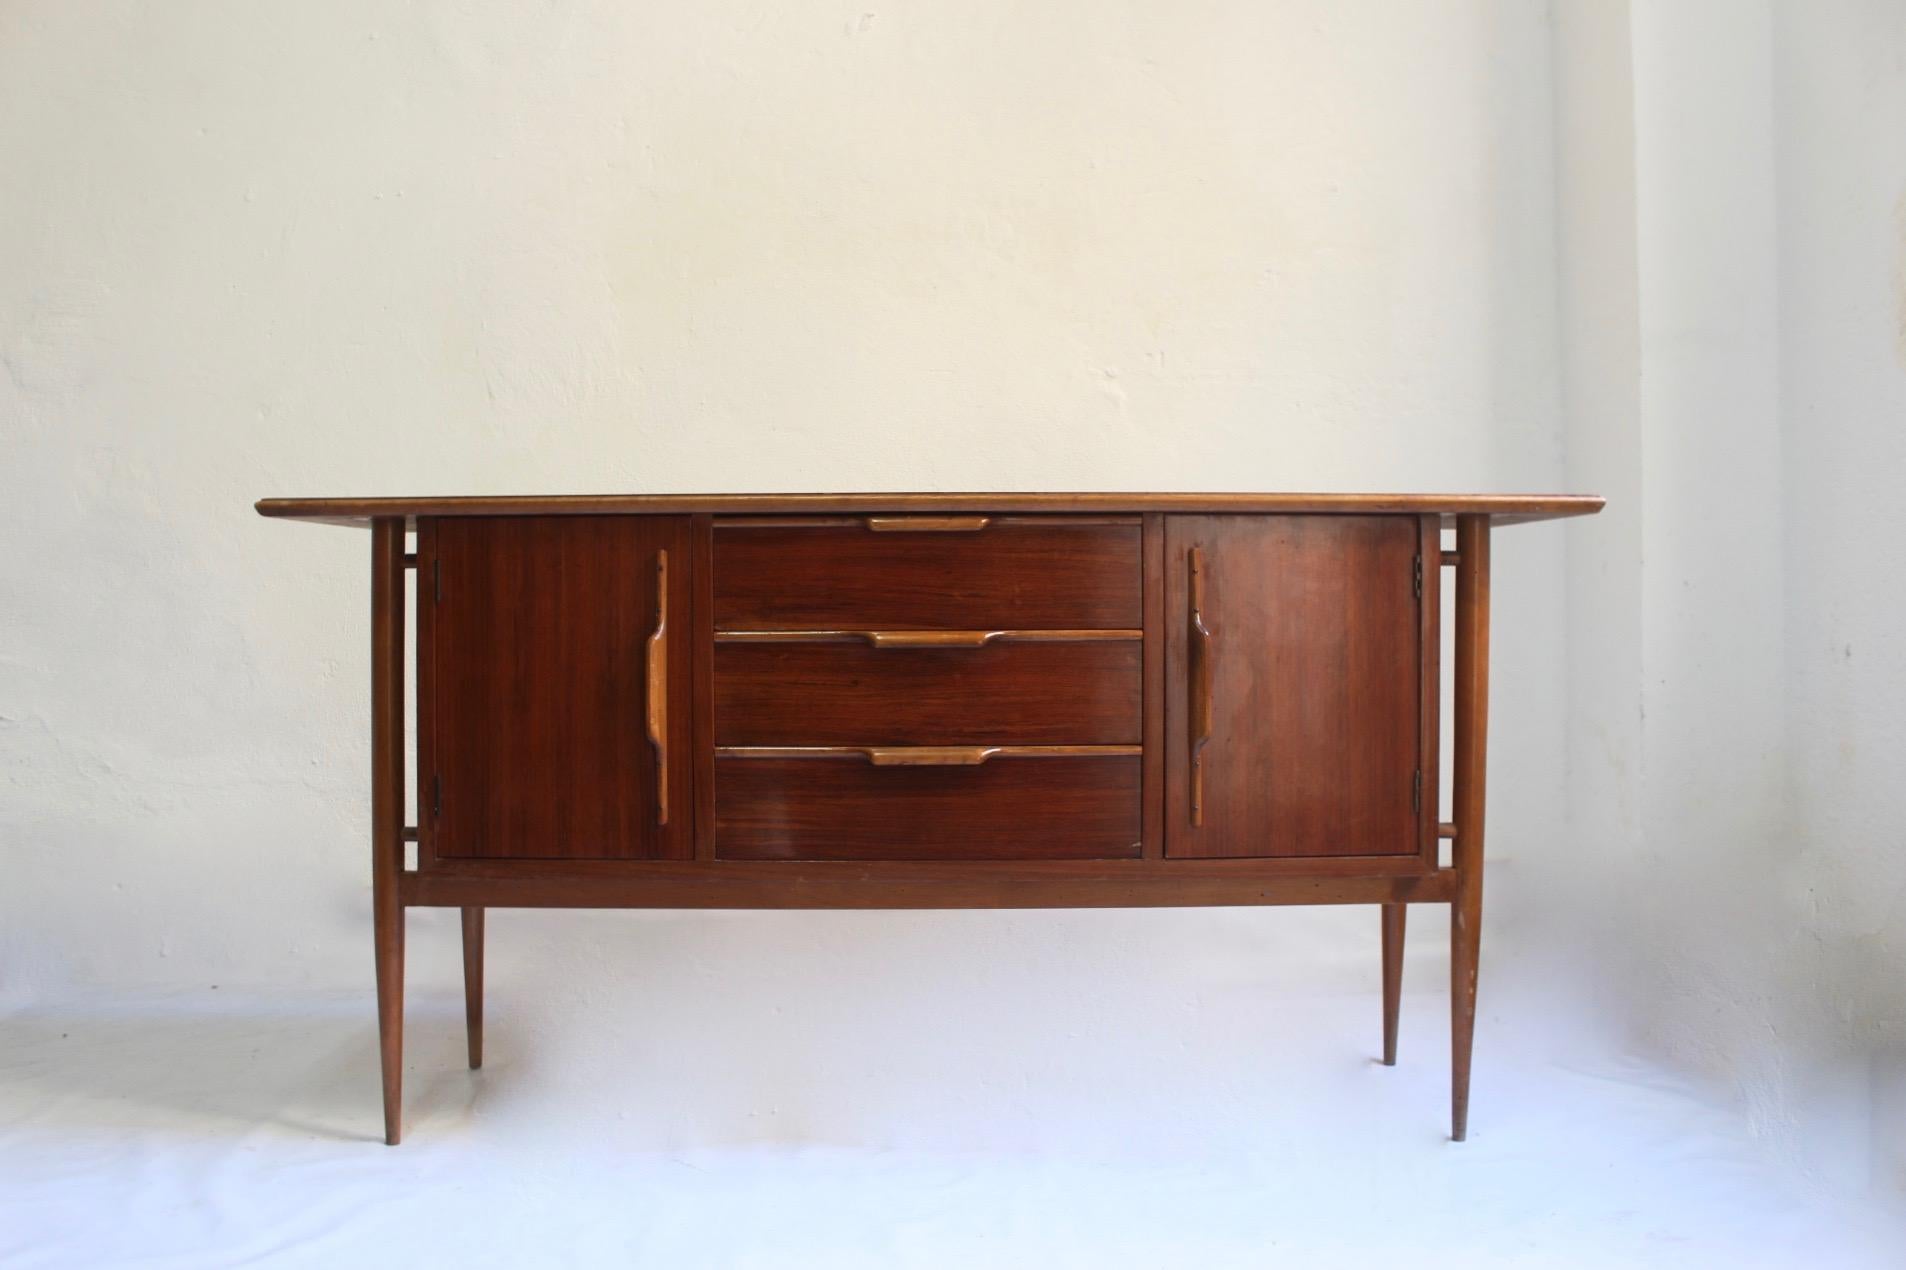 Midcentury Spanish Short sideboard wit drawers and side cabinets, 1960s.
Perfect for small city apartments.
 